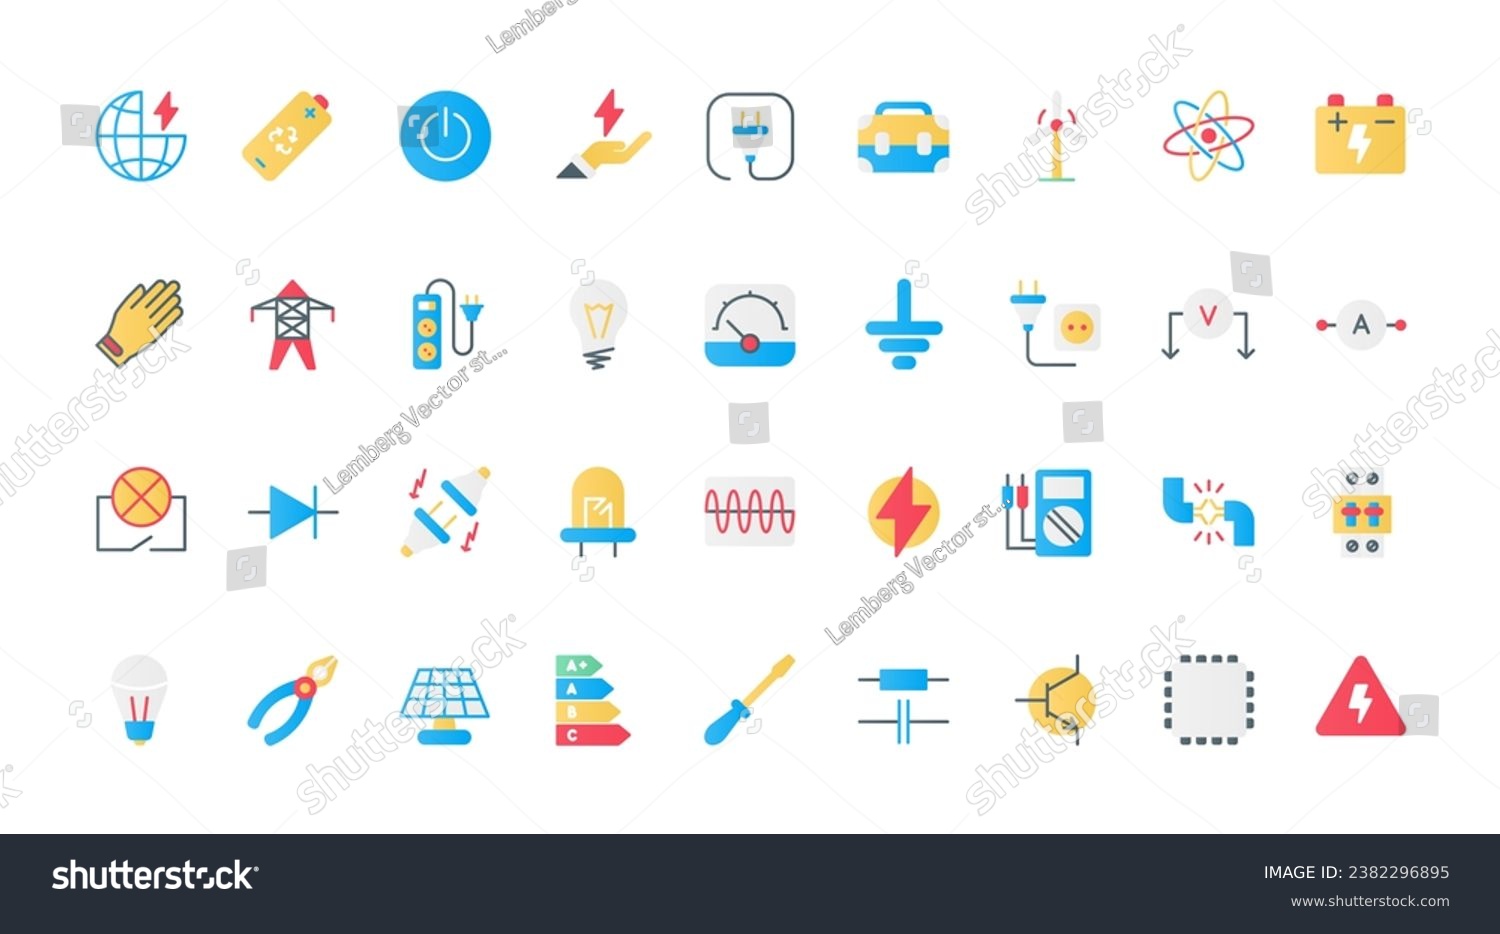 SVG of Electricity, electric circuit symbols flat icons set vector illustration. Voltage power flat and lightning charge, protection gear and equipment of electrician and bulb, plug and socket svg